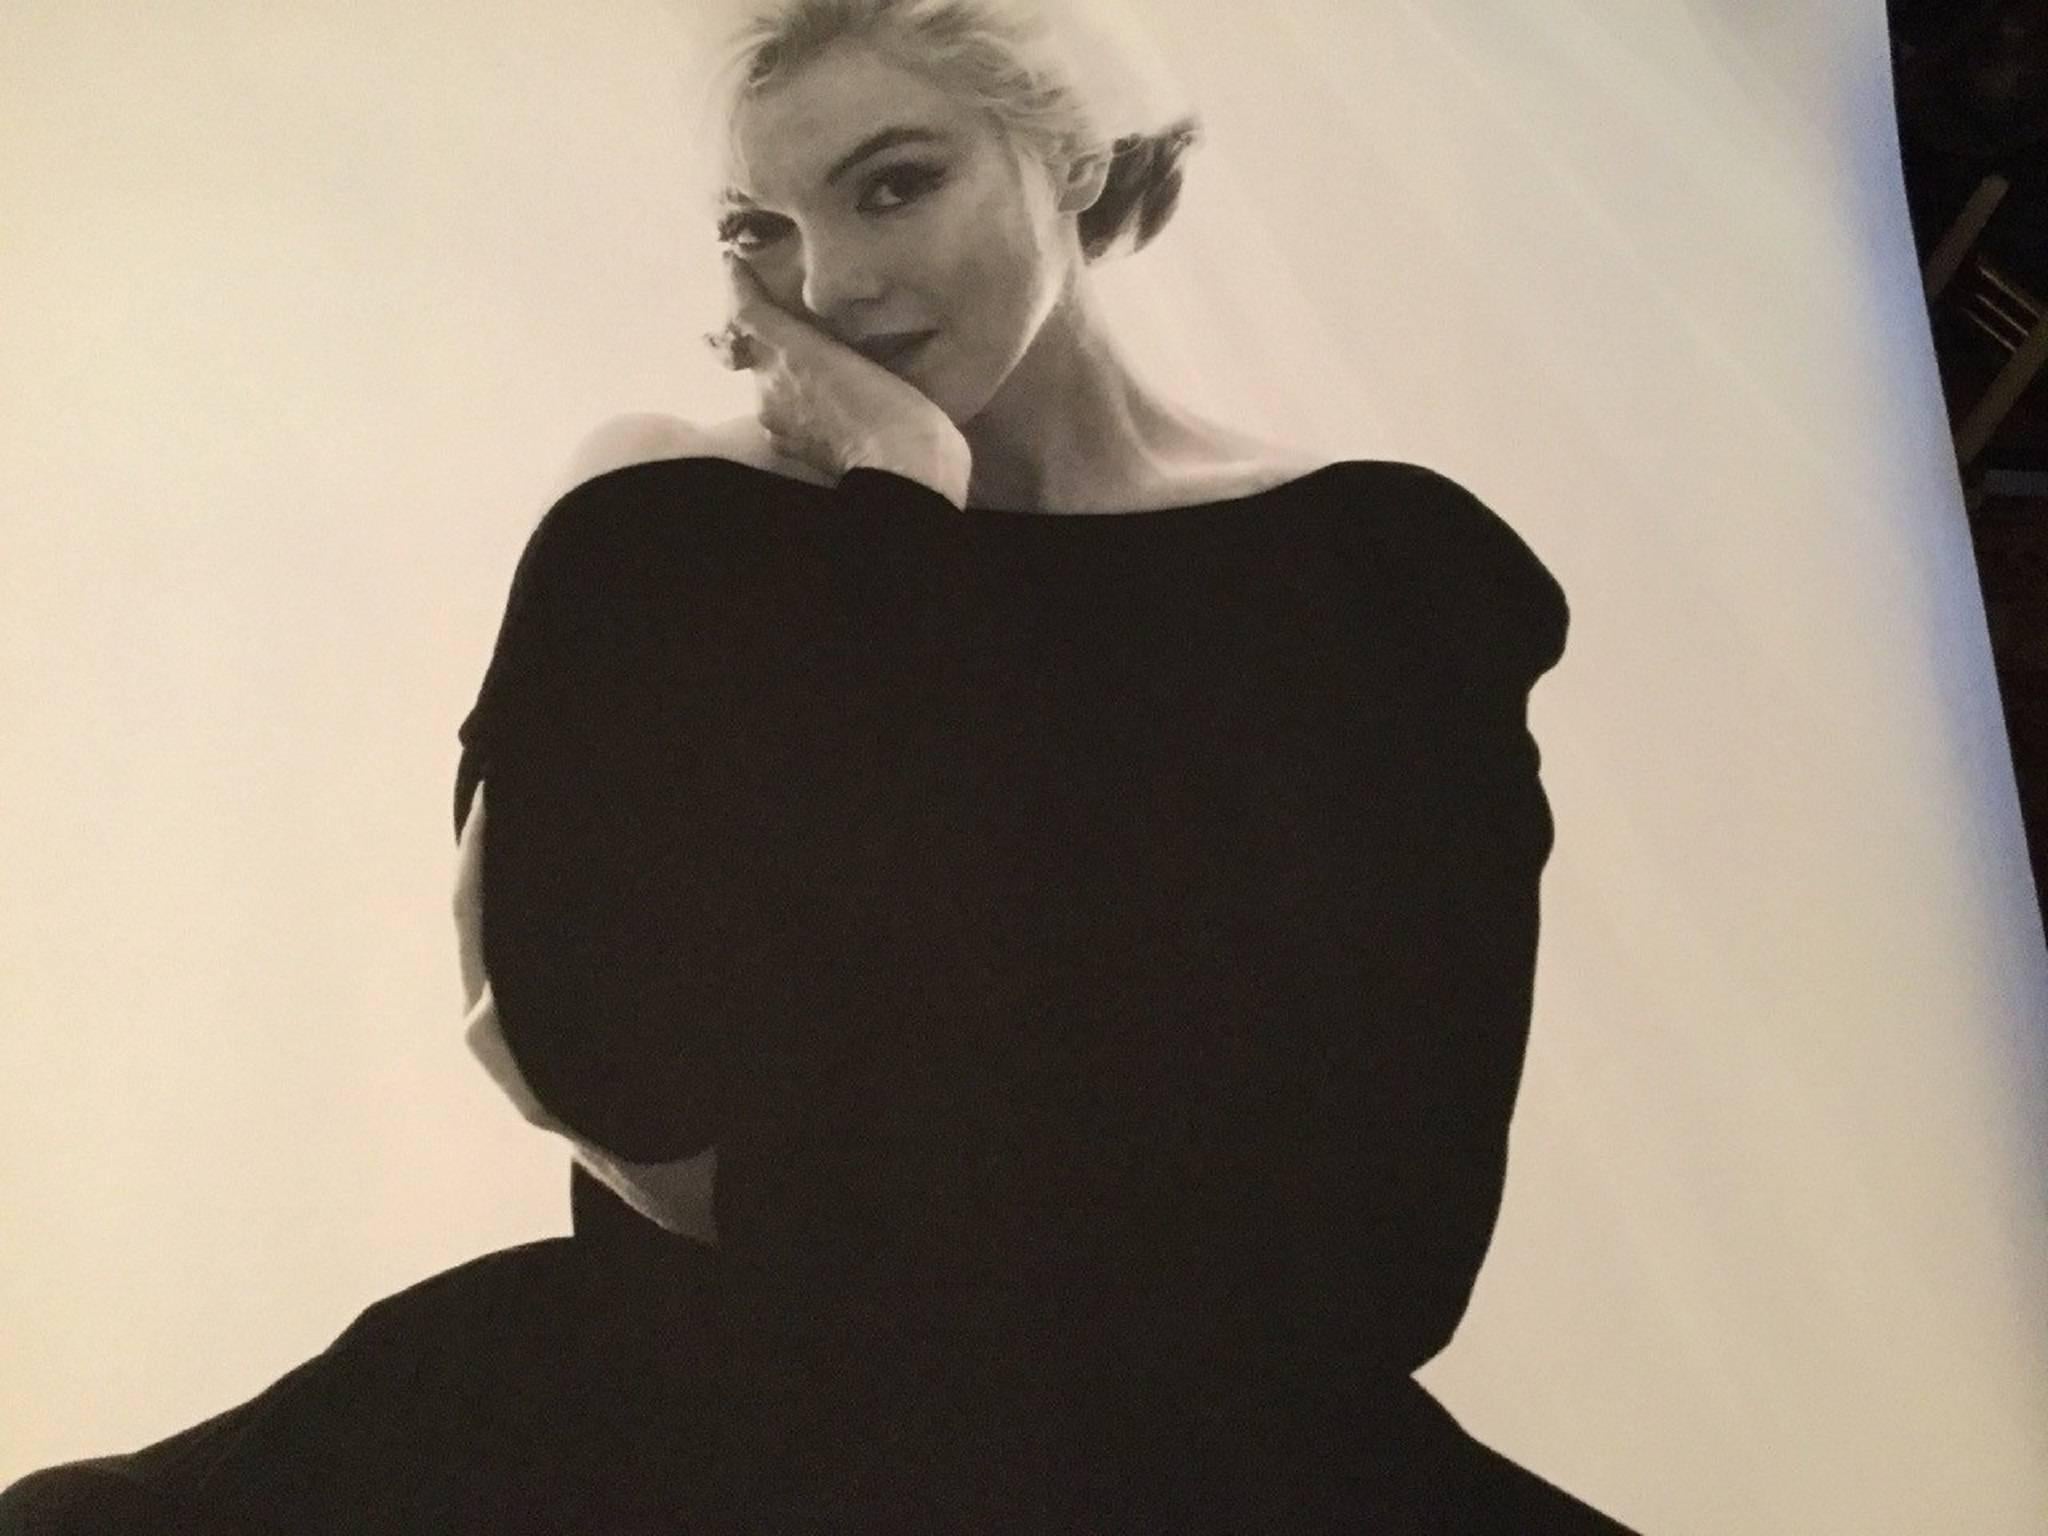 Marilyn in the black dress looking at you - Photograph by Bert Stern